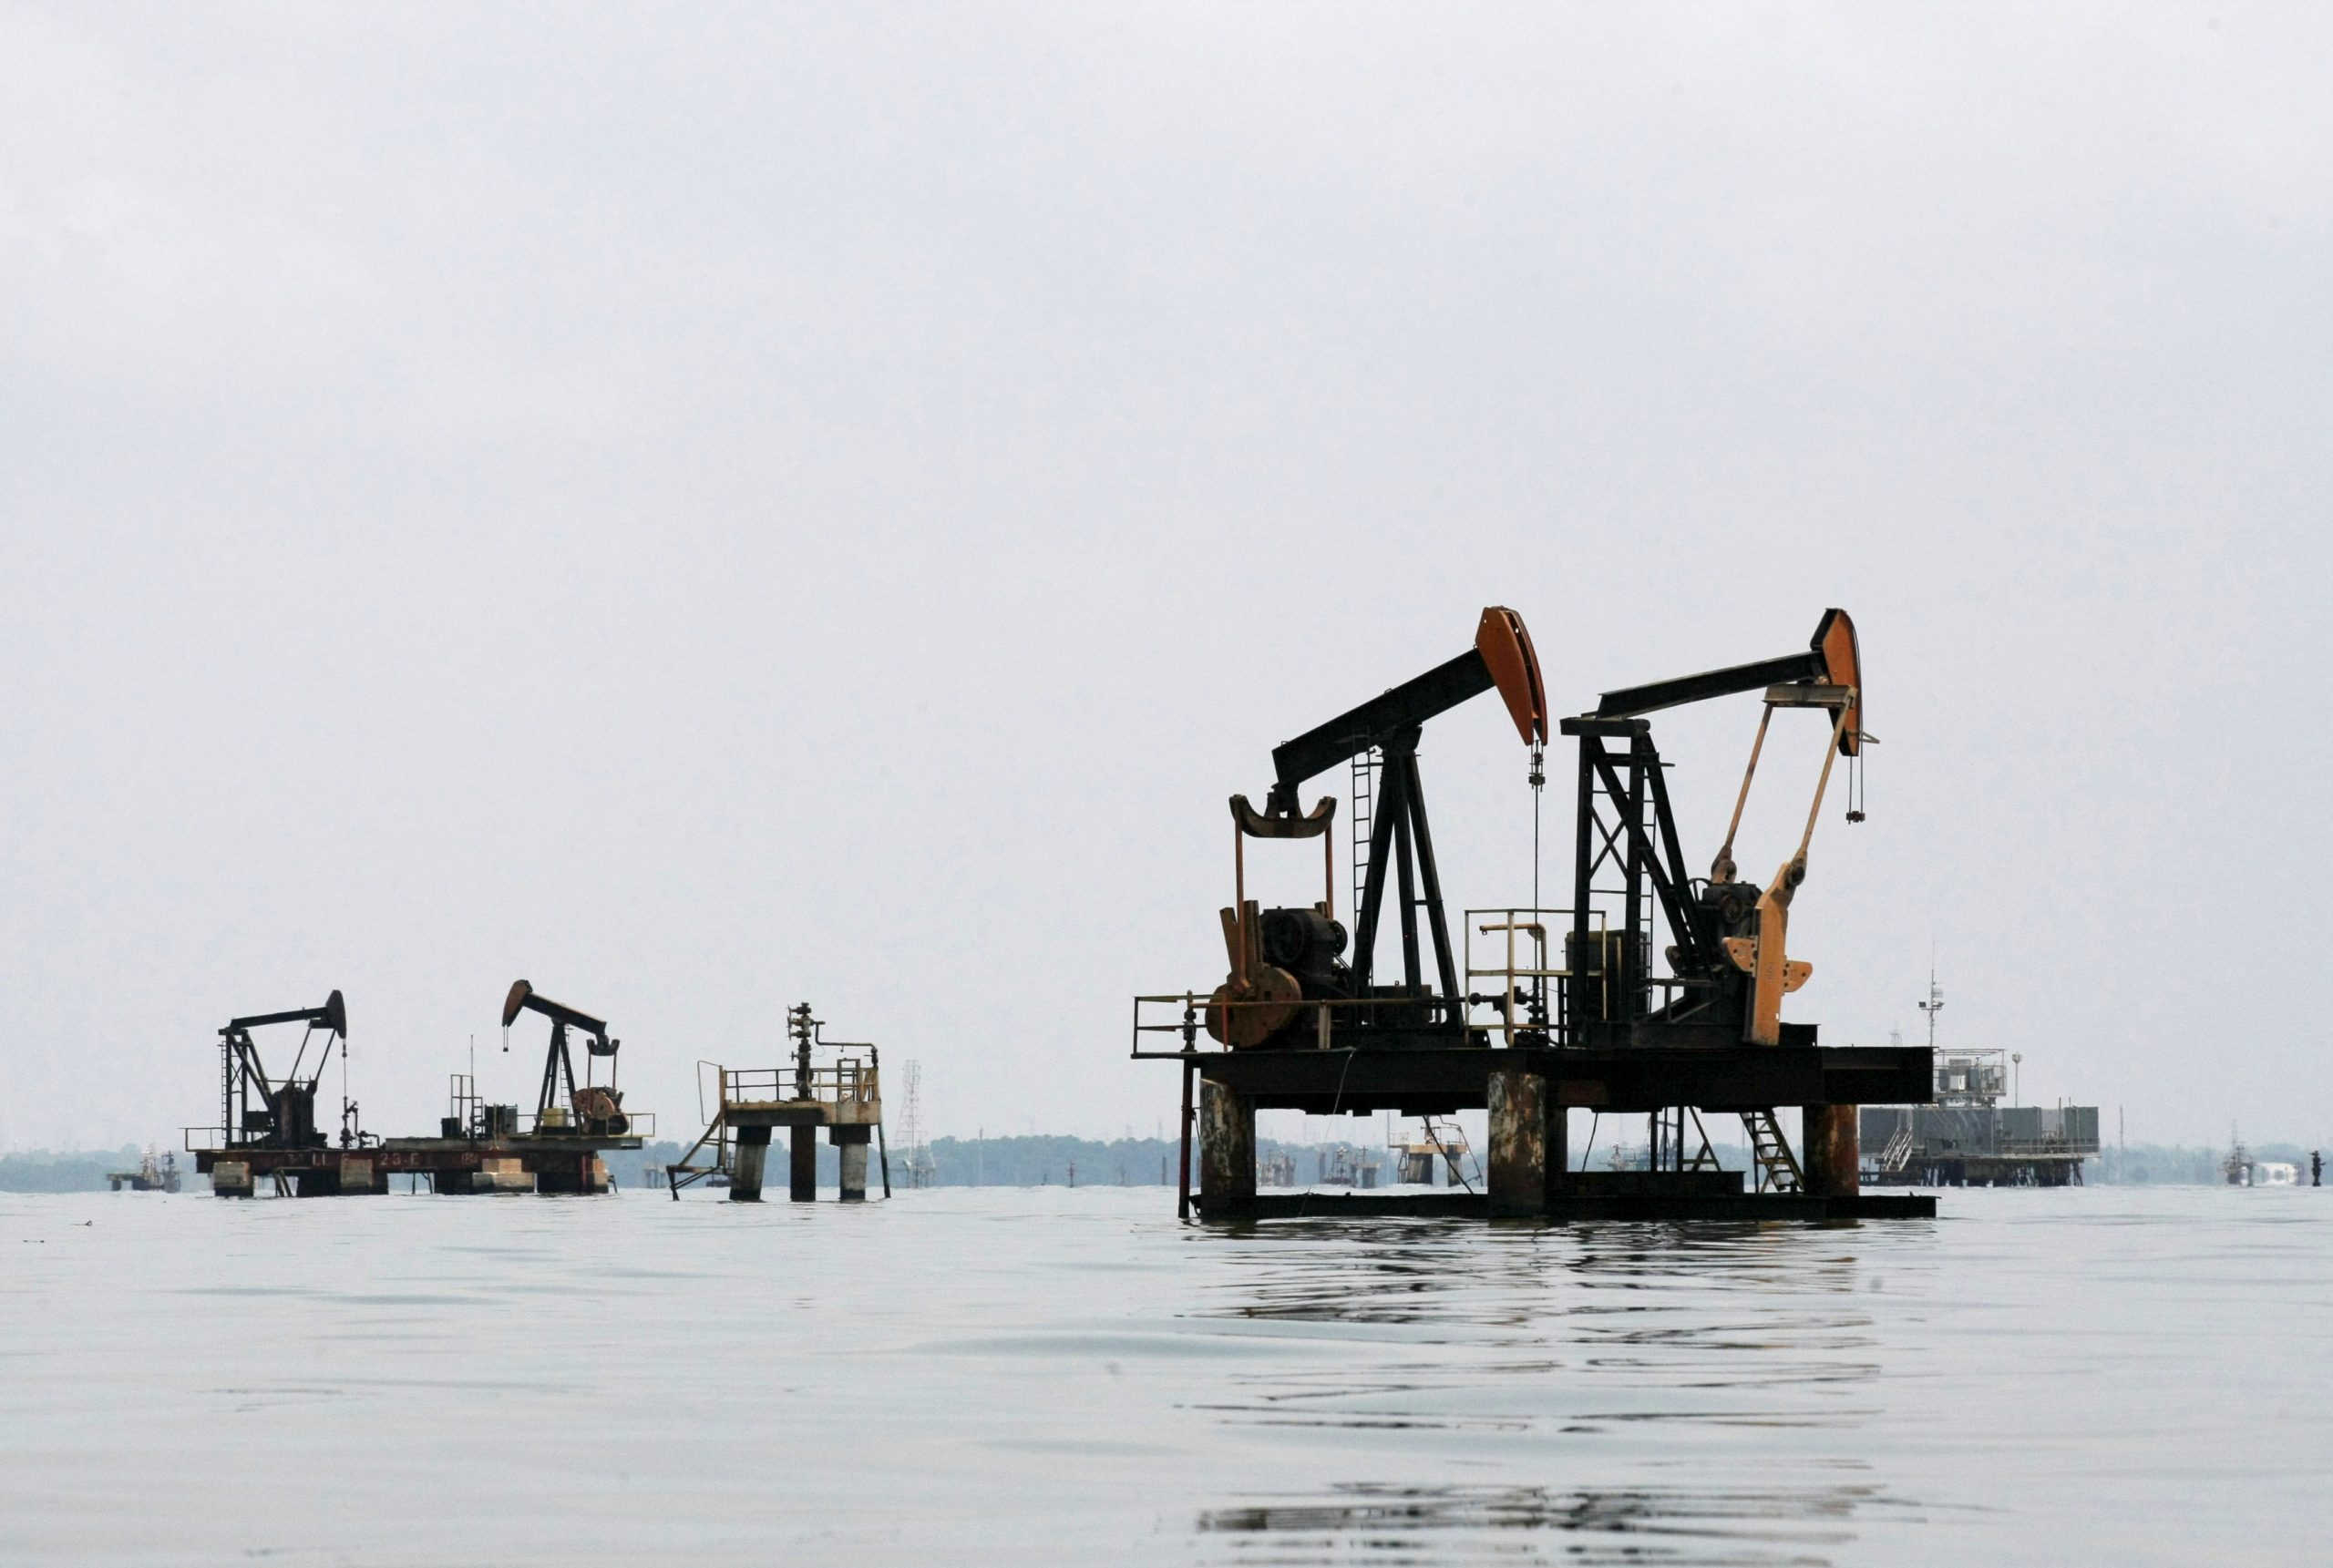 Oil pumps are seen in Lagunillas, Ciudad Ojeda, in Lake Maracaibo in the state of Zulia, Venezuela, March 20, 2015. Venezuela's national crime pandemic - the United Nations says the country has the world's second-highest murder rate after Honduras - is a growing headache for the oil industry, which accounts for nearly all of the country's export revenues. Hold-ups and thefts in the sector are on the rise, taking a toll on output, according to interviews with around 40 people, including oil workers, union leaders, foreign executives, opposition politicians, scrap dealers, and people who live near oil installations. To match Insight VENEZUELA-OIL/CRIME Picture taken on March 20, 2015.  REUTERS/Isaac Urrutia - RTR4YW5C